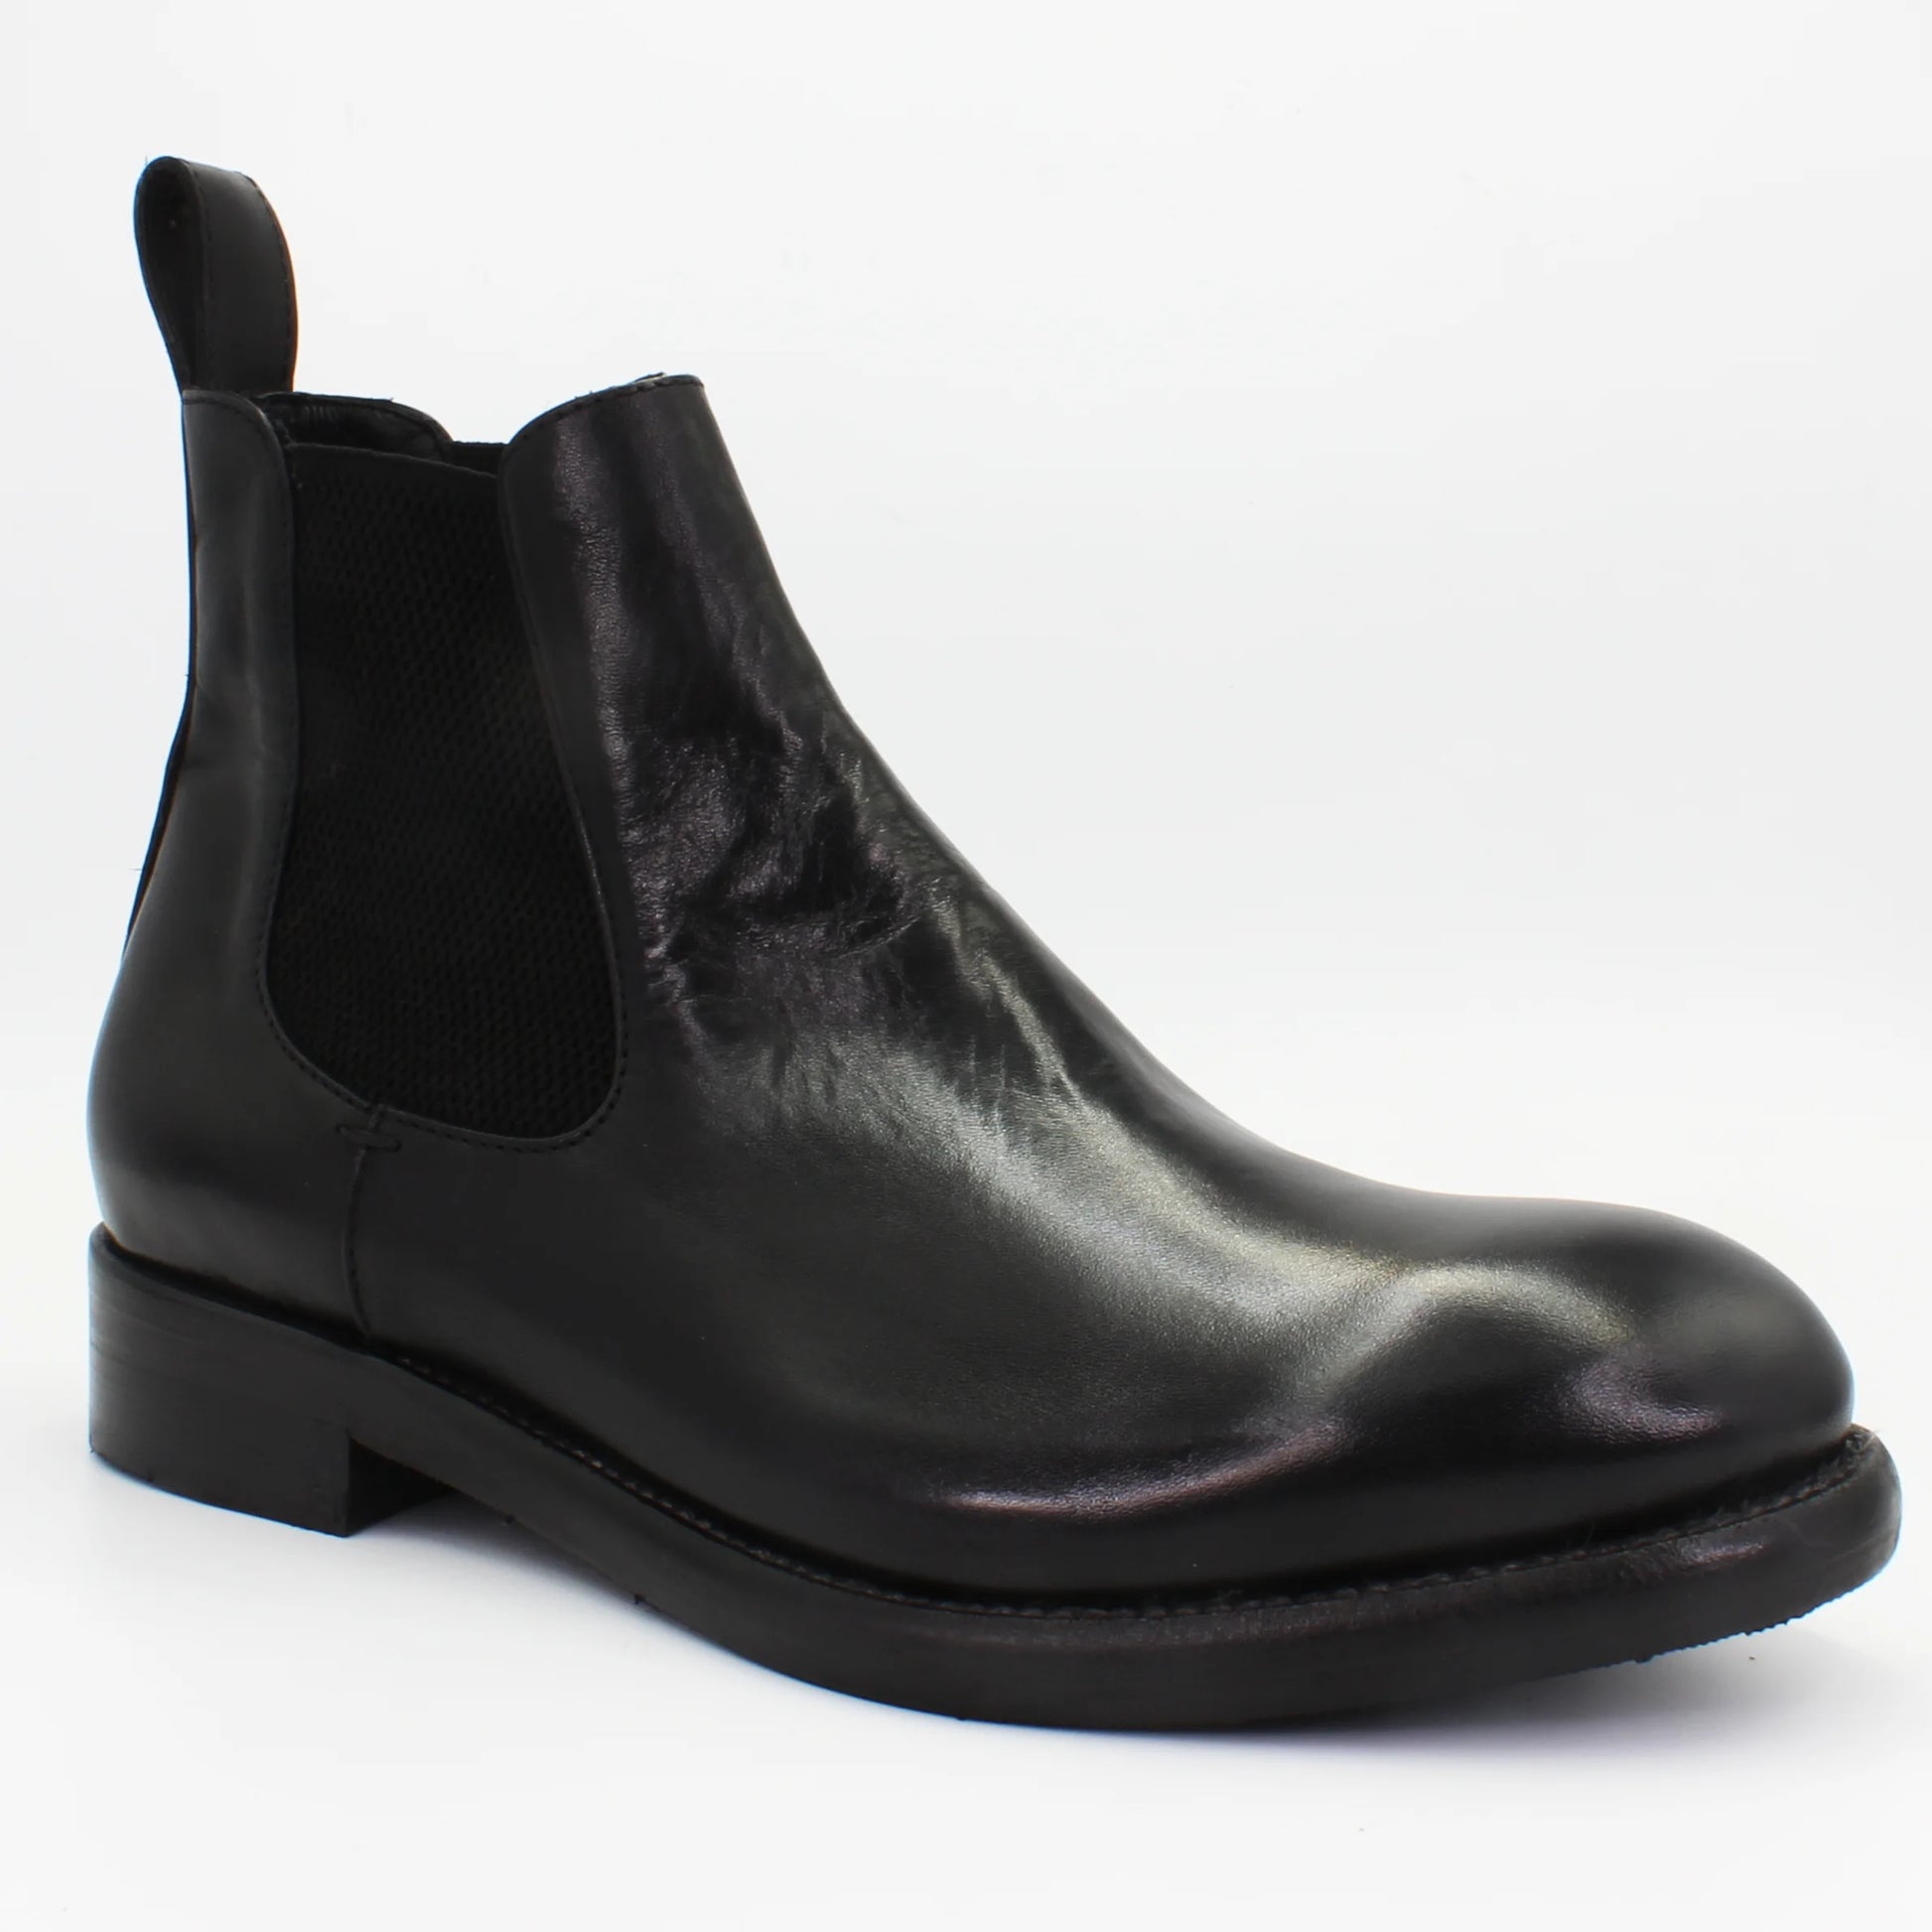 Shop Handmade Italian Leather Chelsea Boot in Nero (JP36526/20) or browse our range of hand-made Italian boots for men in leather or suede in-store at Aliverti Cape Town, or shop online. We deliver in South Africa & offer multiple payment plans as well as accept multiple safe & secure payment methods.